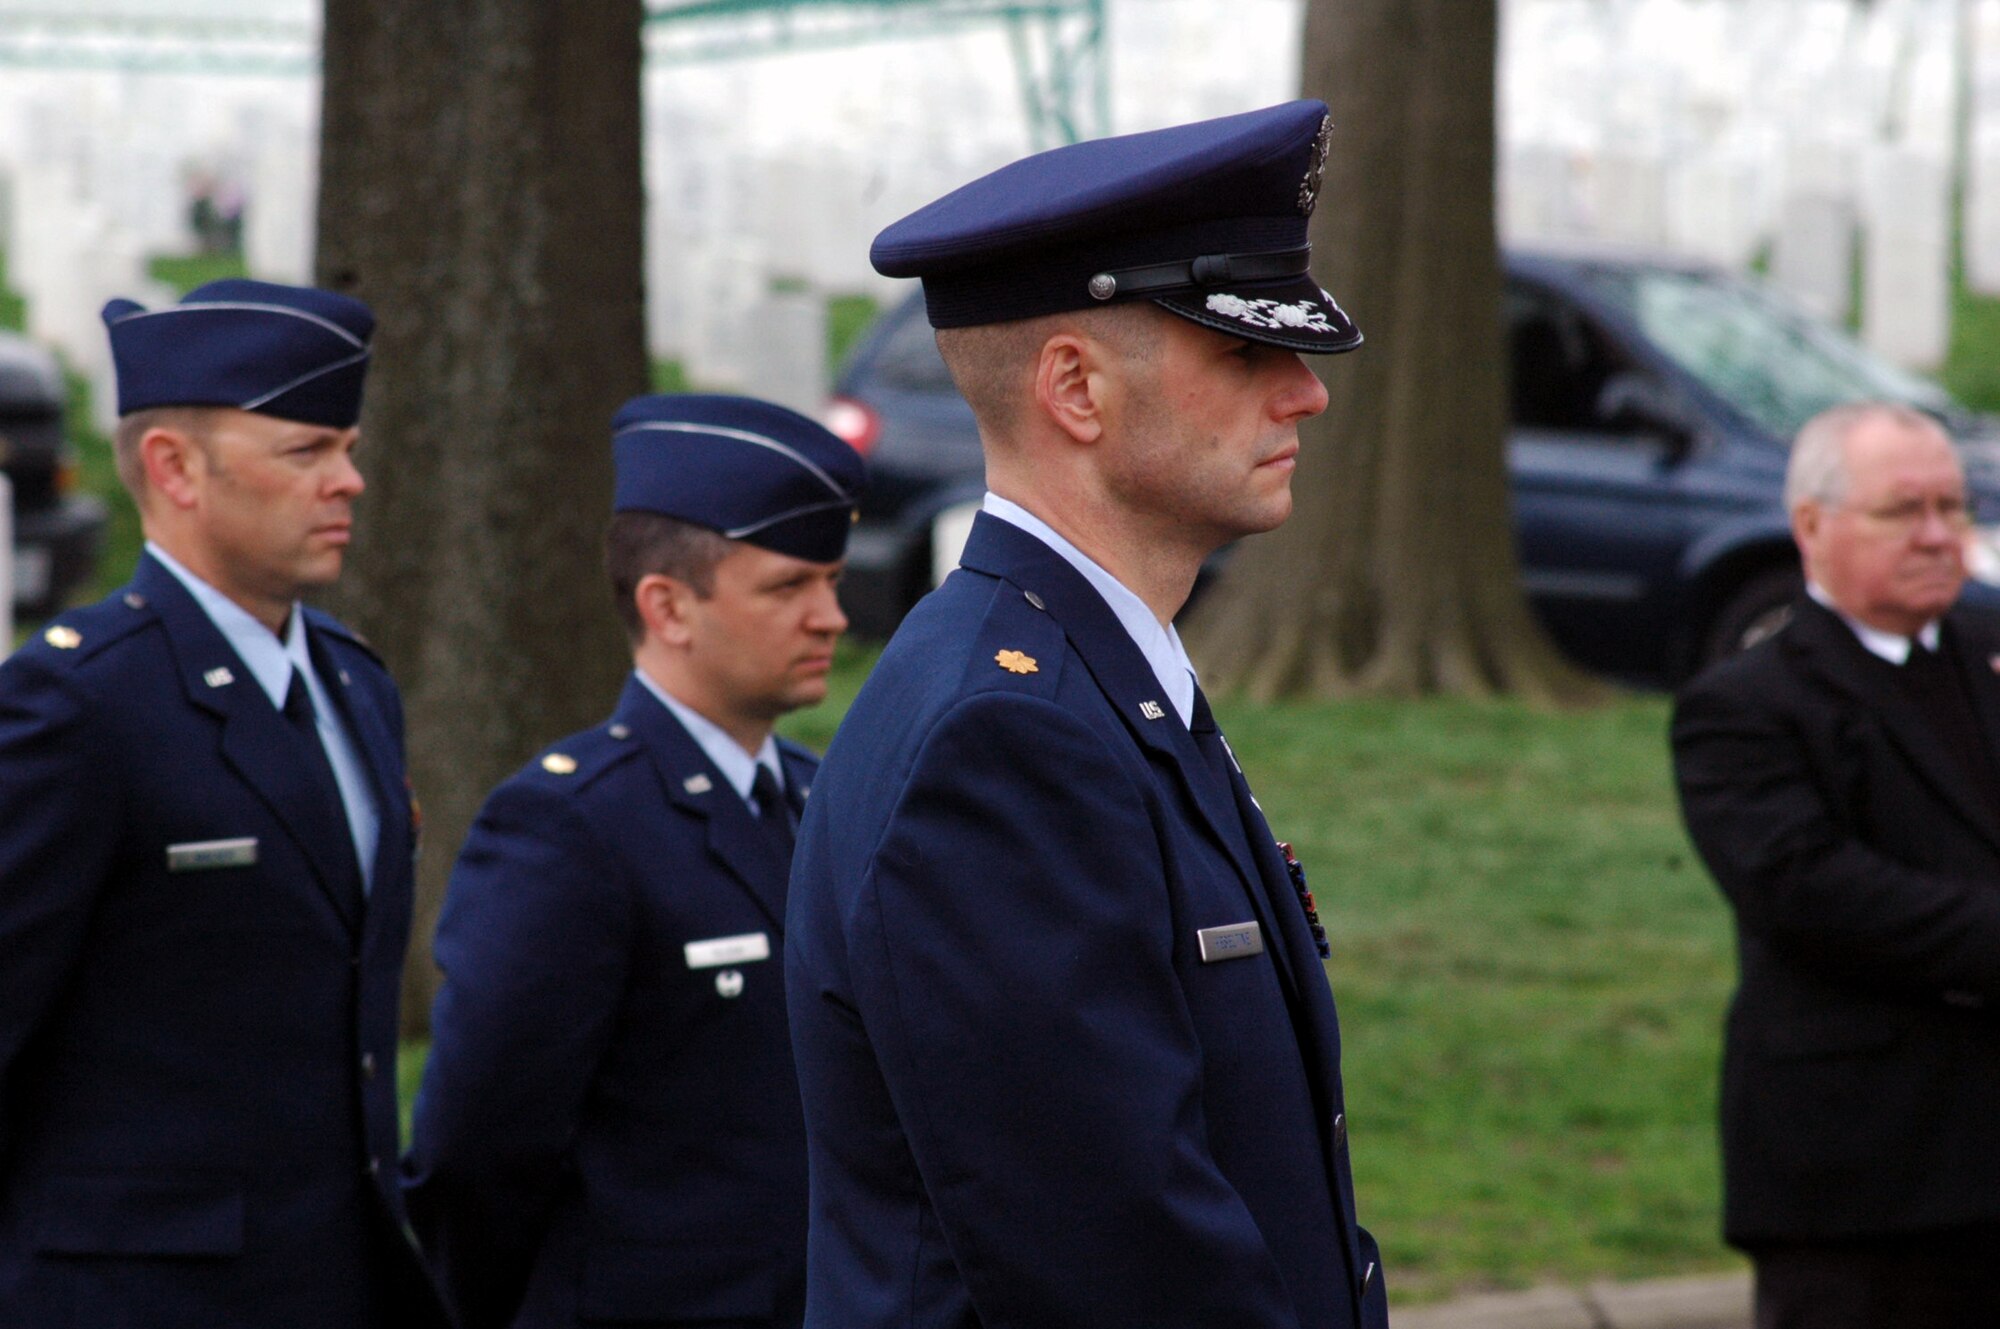 Maj. Phil Heseltine, U.S. Air Force Expeditionary Center executive officer to the commander, Fort Dix, N.J., participates in the funeral for Air Force Maj. Robert F. Woods April 9, 2008, at Arlington National Cemetery, Va.  Earlier that day, Major Heseltine presented POW/MIA bracelet to the family of Major Woods, whose name is on the bracelet that Major Heseltine wore for 18 years.  (U.S. Air Force Photo/Tech. Sgt. Scott T. Sturkol)